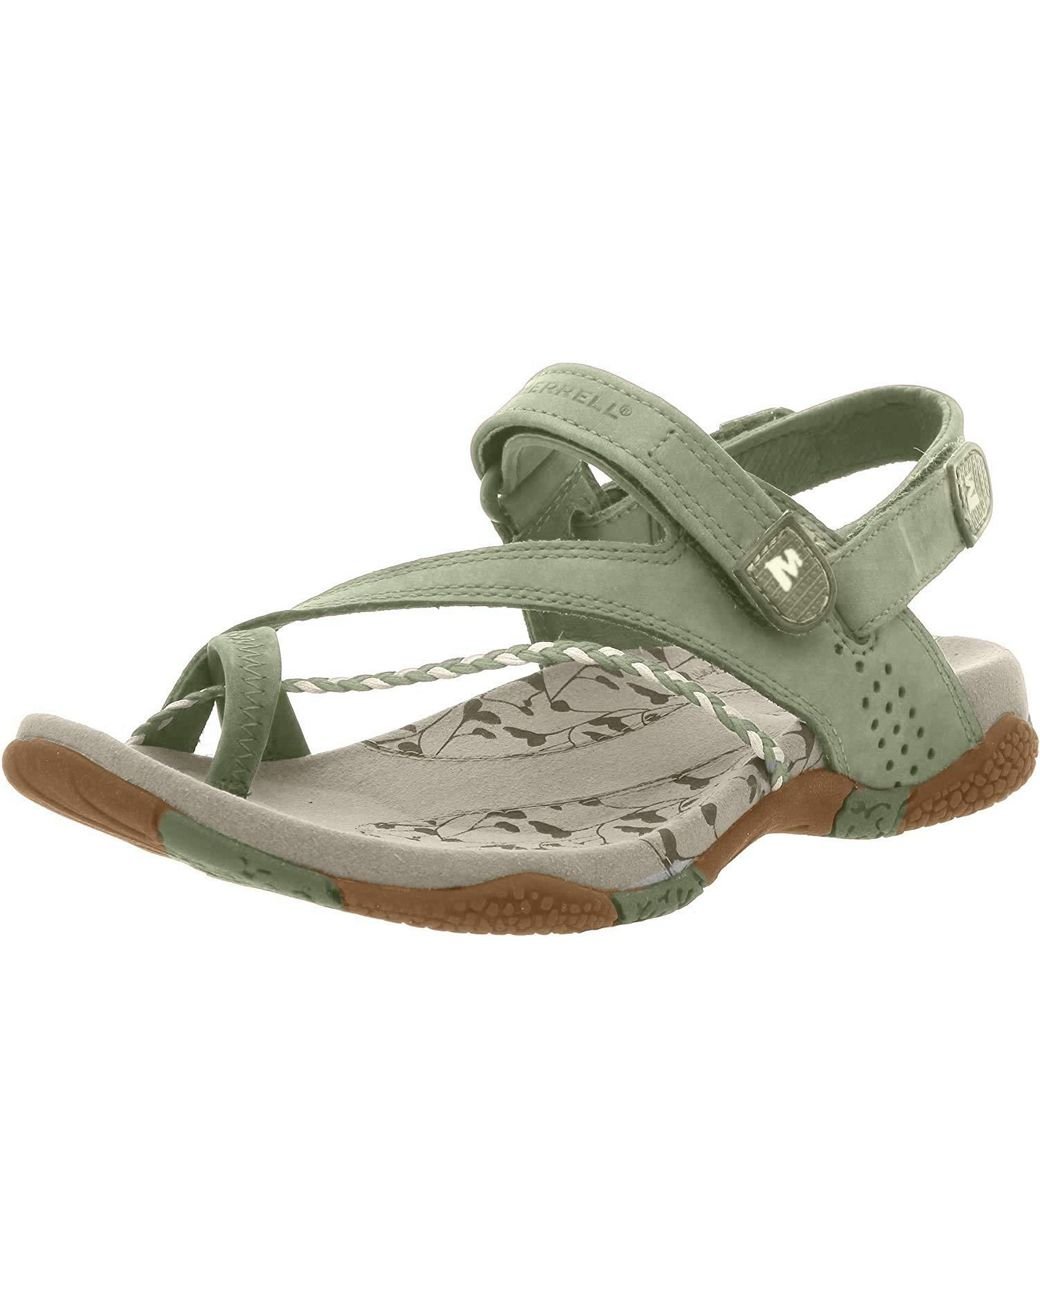 Merrell Siena Seagrass Flat Women Sandals | Outdoor Walking Summer Shoes For Ladies | Premium Leather Q-form Sole | Uk 4 Lyst